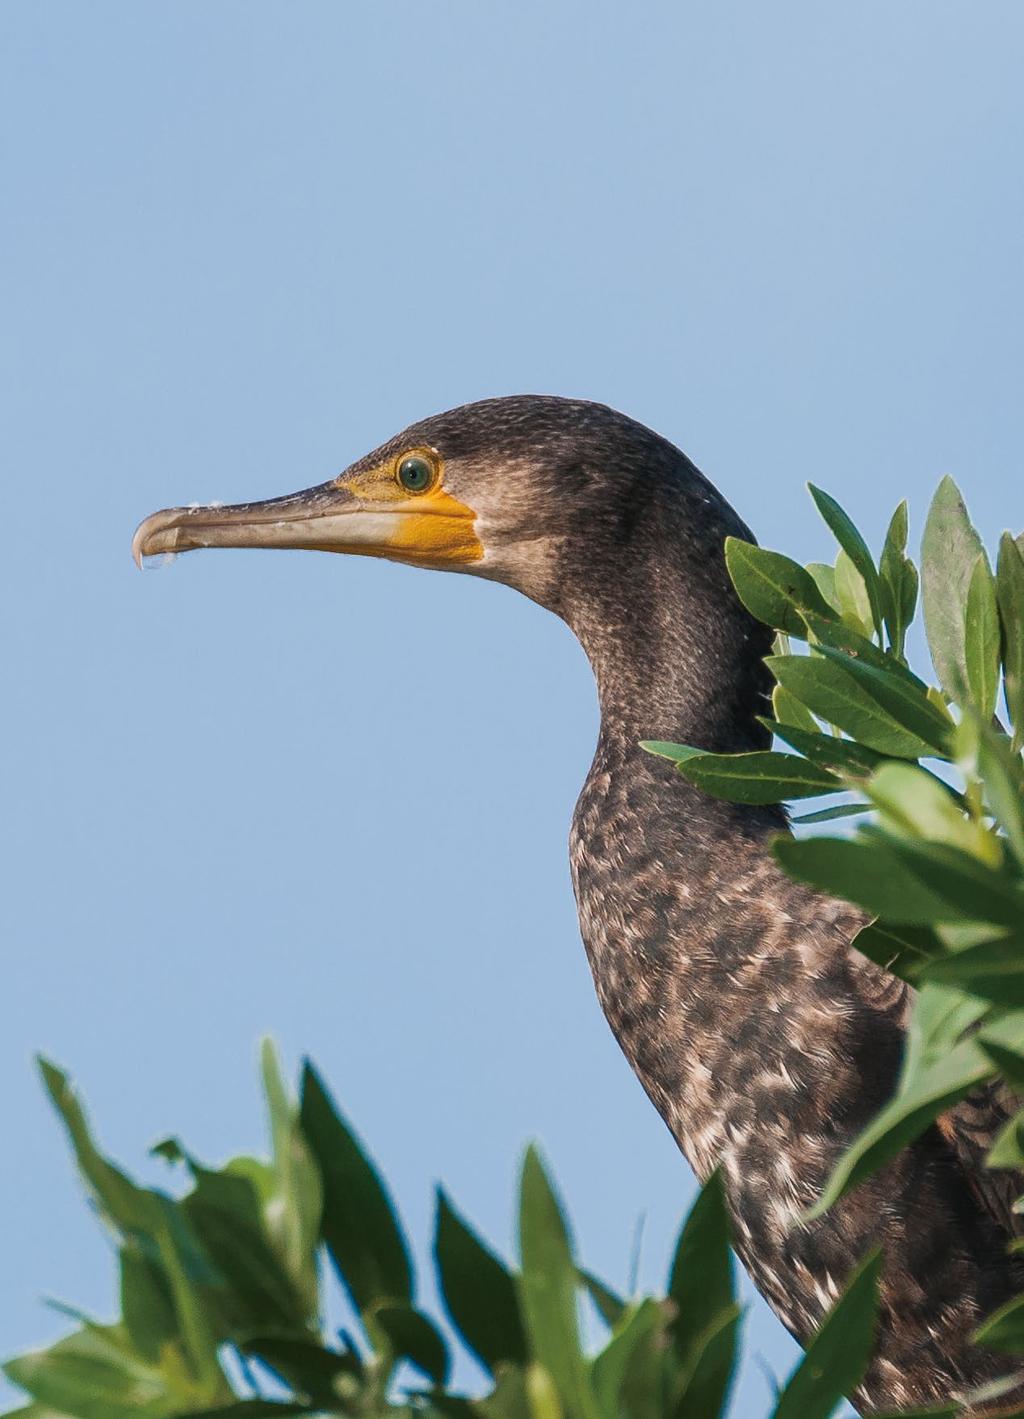 Great Cormorant Phalacrocorax carbo CLOSE-UPS & ACTION The biggest challenge in bird photography is